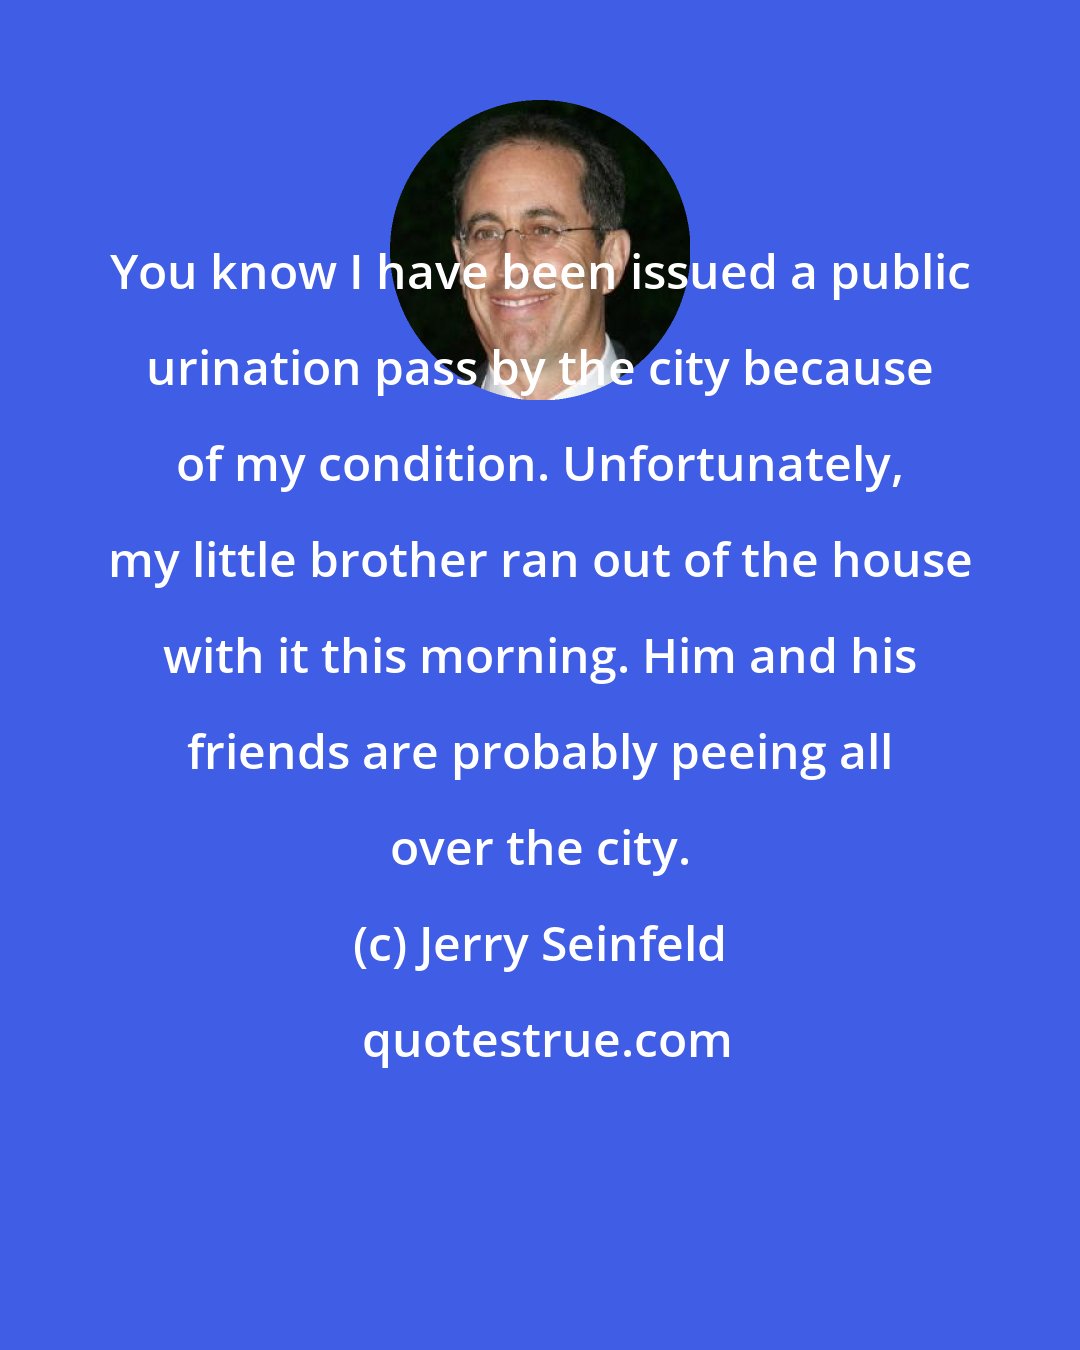 Jerry Seinfeld: You know I have been issued a public urination pass by the city because of my condition. Unfortunately, my little brother ran out of the house with it this morning. Him and his friends are probably peeing all over the city.